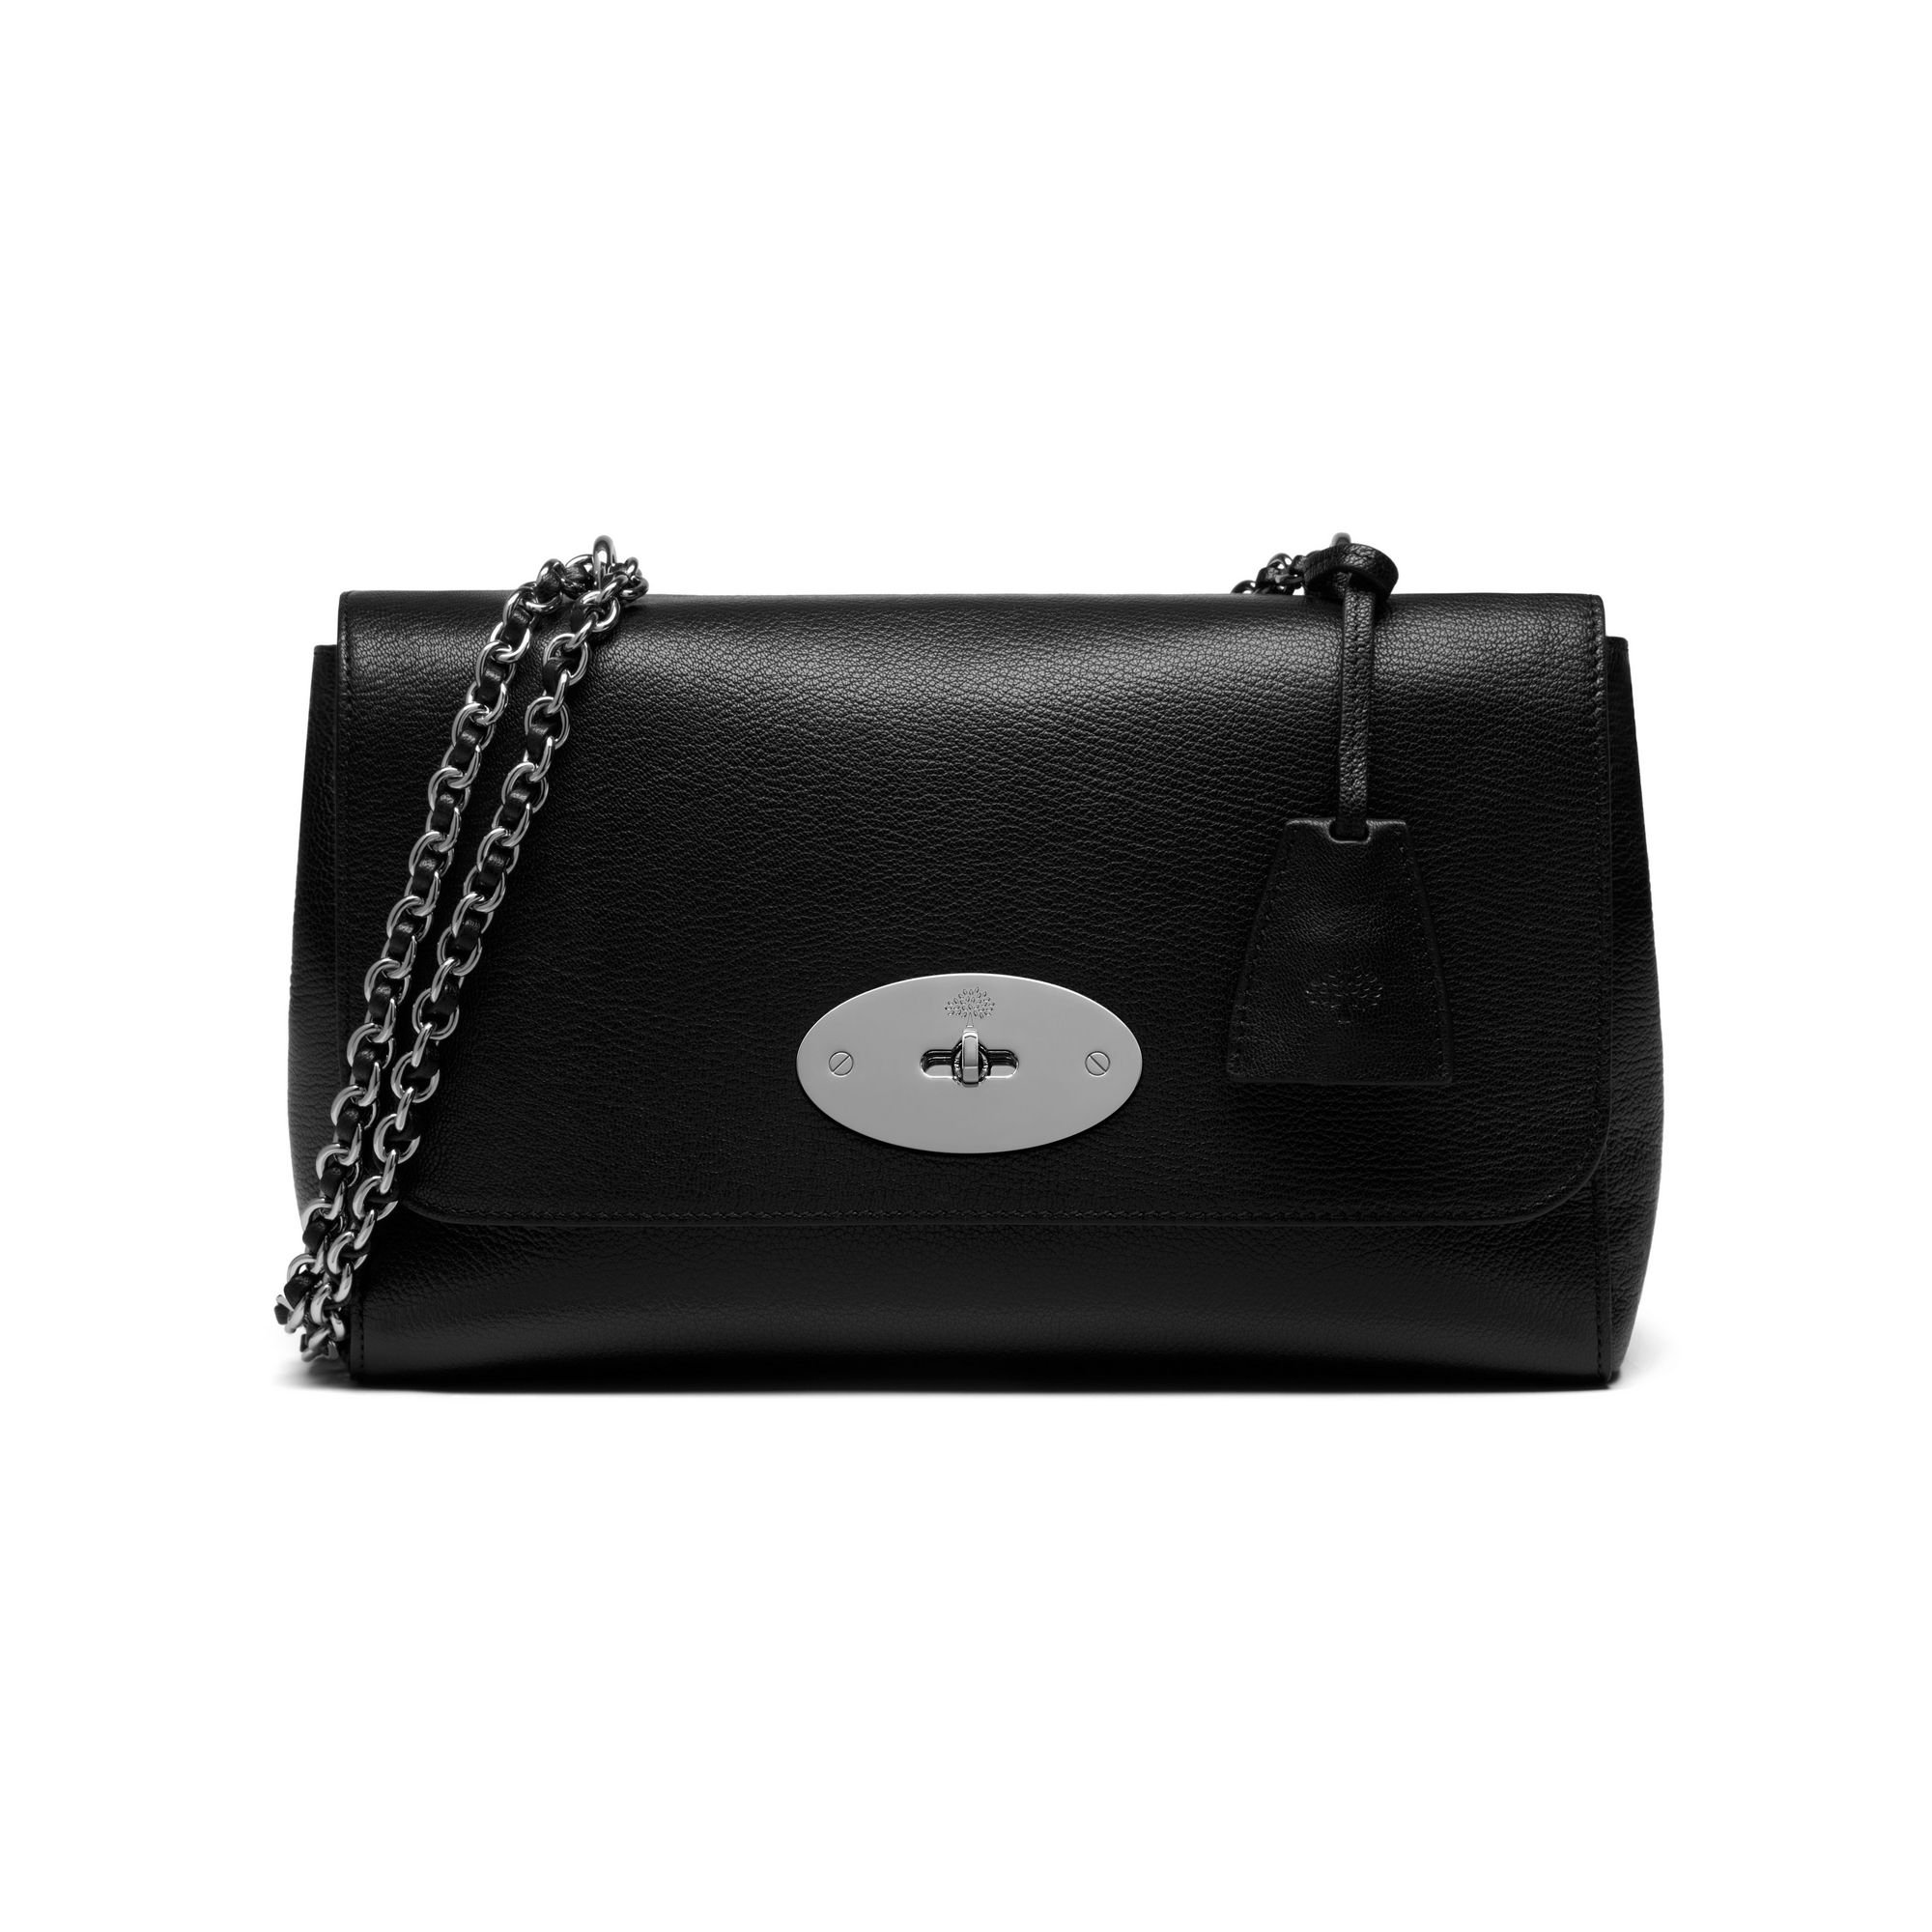 Mulberry Medium Lily - Black Glossy Goat with silver Hardware